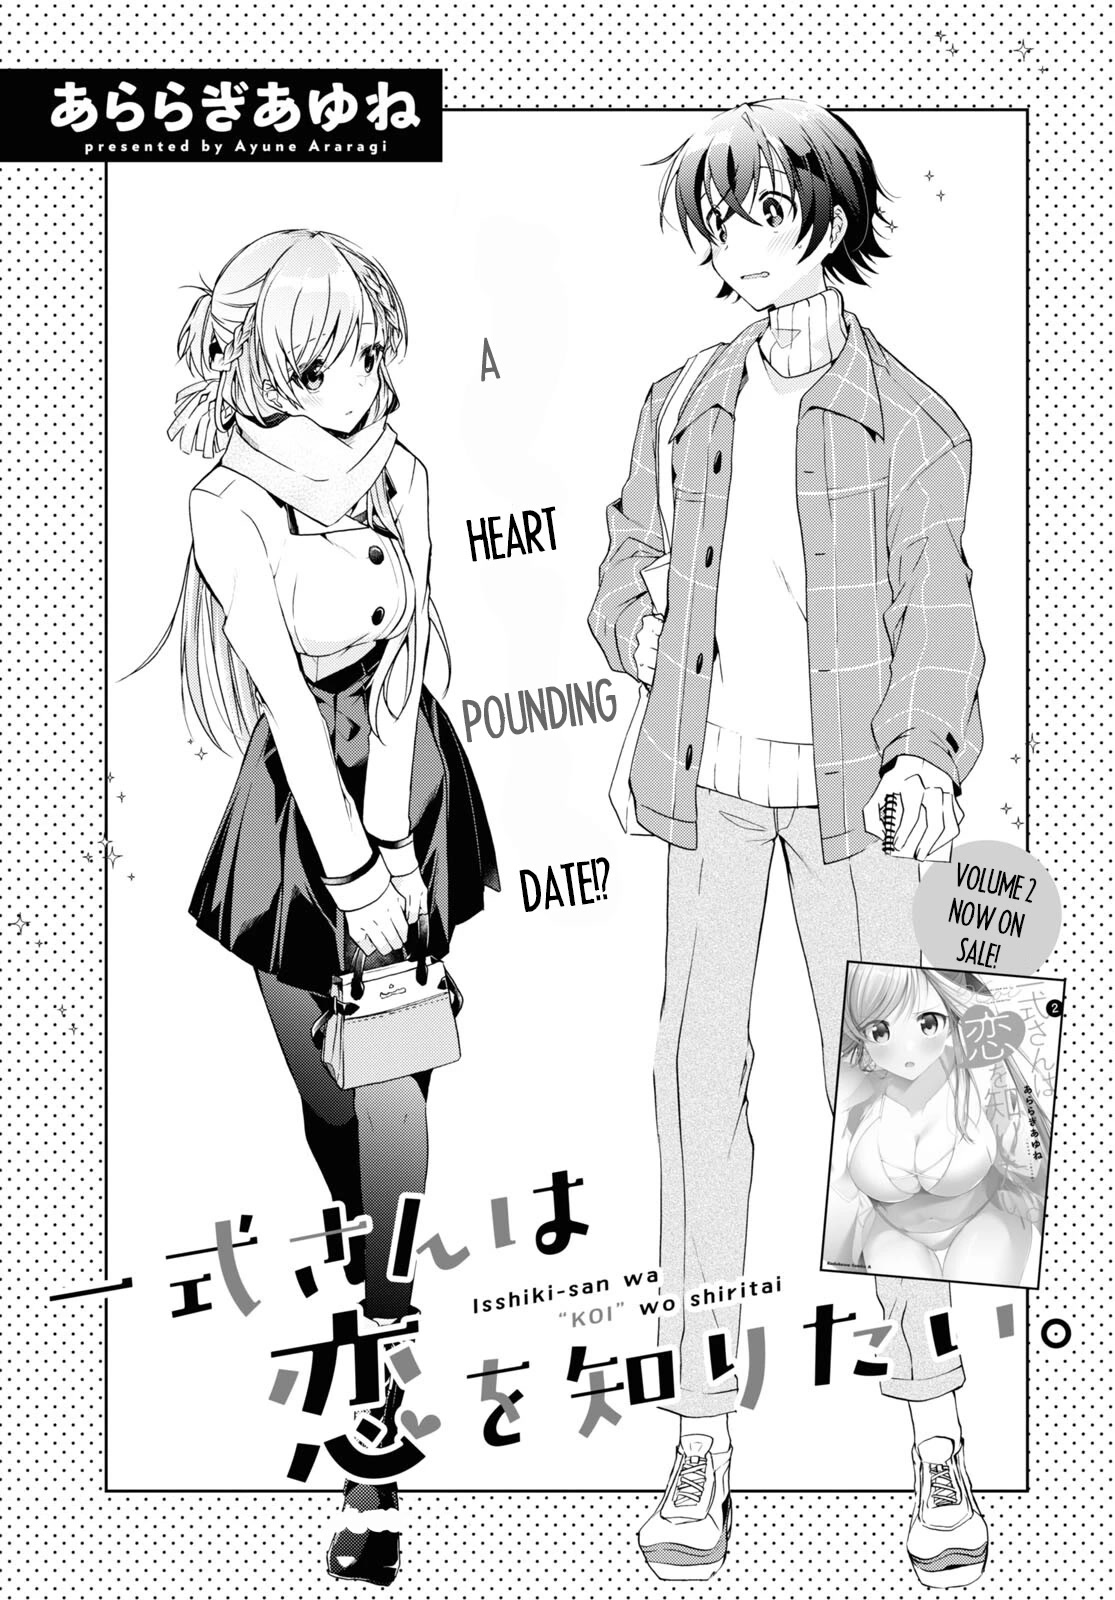 Isshiki-san Wants to Know About Love. - chapter 16 - #3